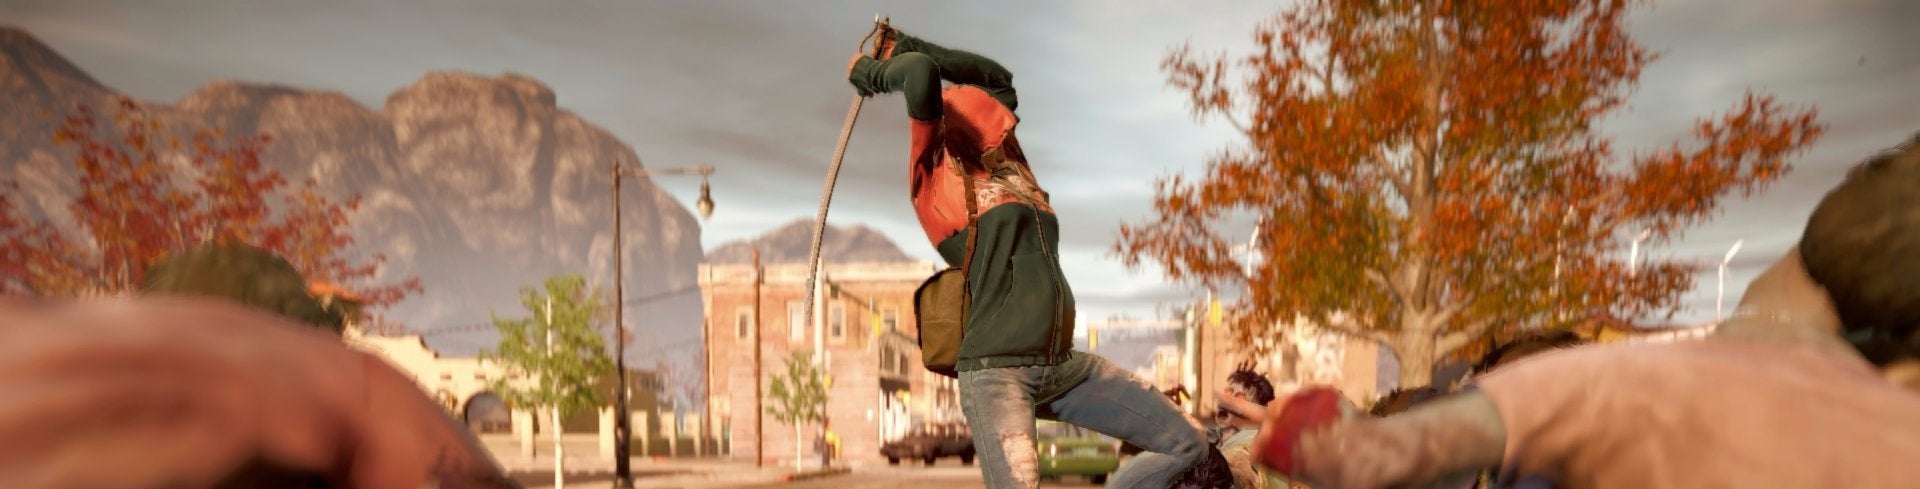 Image for Video: Those unscripted moments in State of Decay